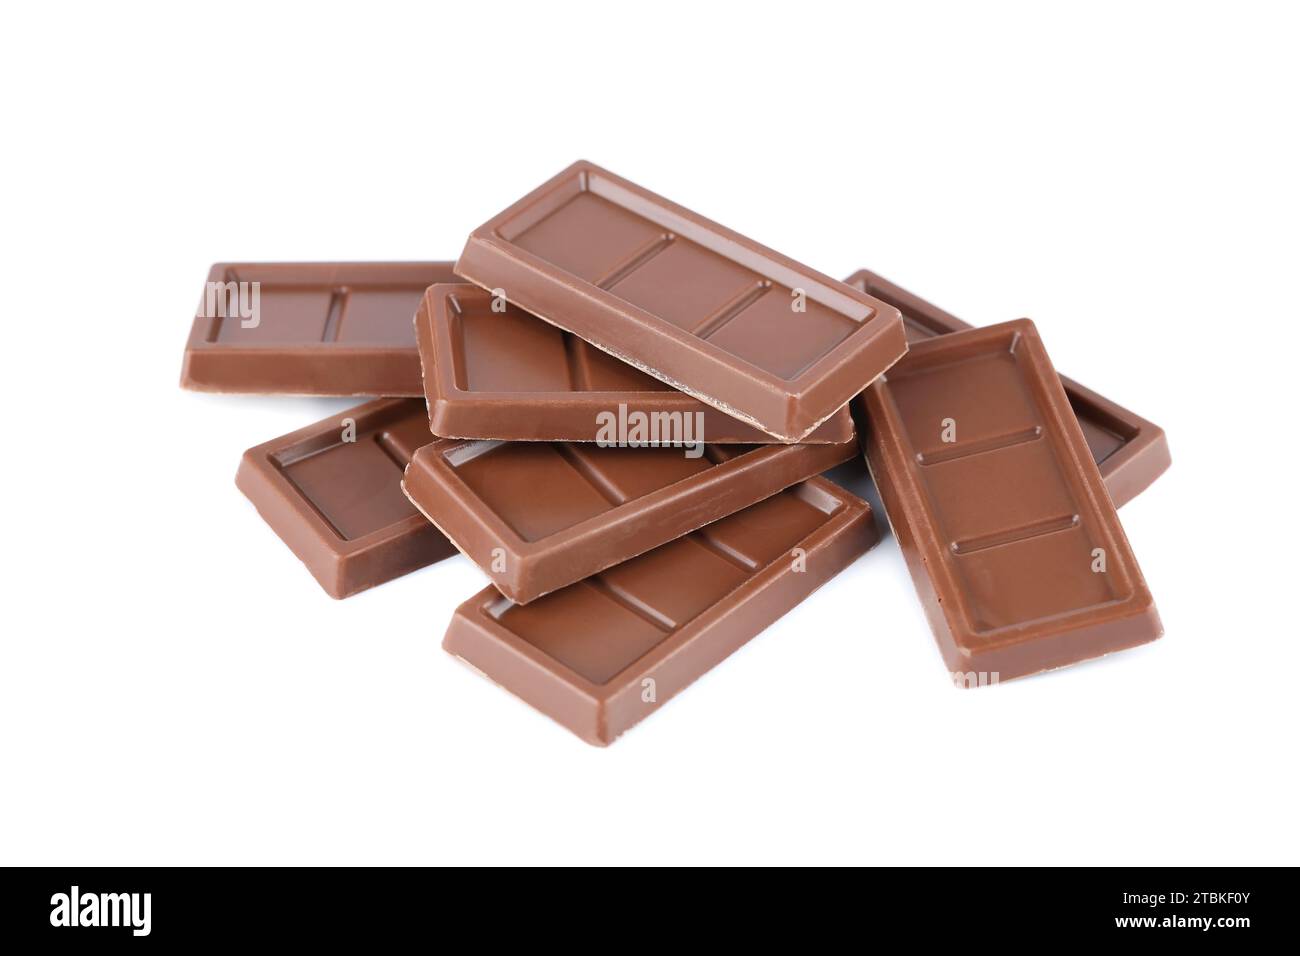 Heap of chocolate bars isolated on white background. Stock Photo